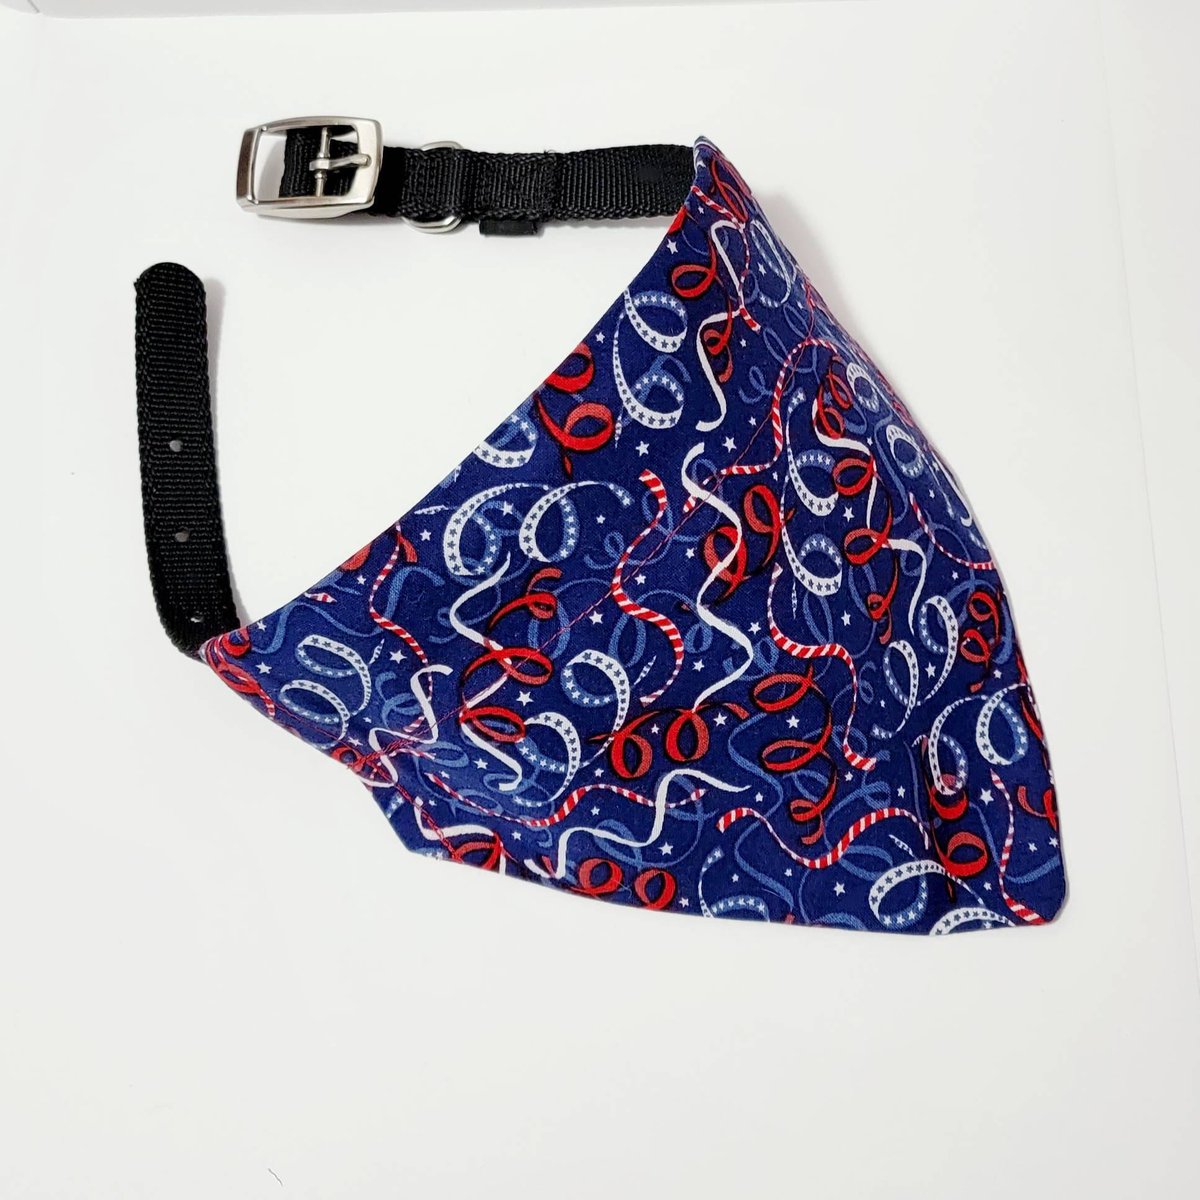 Patriotic Dog  Collar Bandana, Red White Blue Ribbon and Stars, Pet Neckerchief, Over the Collar, Pet Scarf tuppu.net/fa34ee6 #FifteenPawsCreations #Etsy #PetAccessories #LaborDay